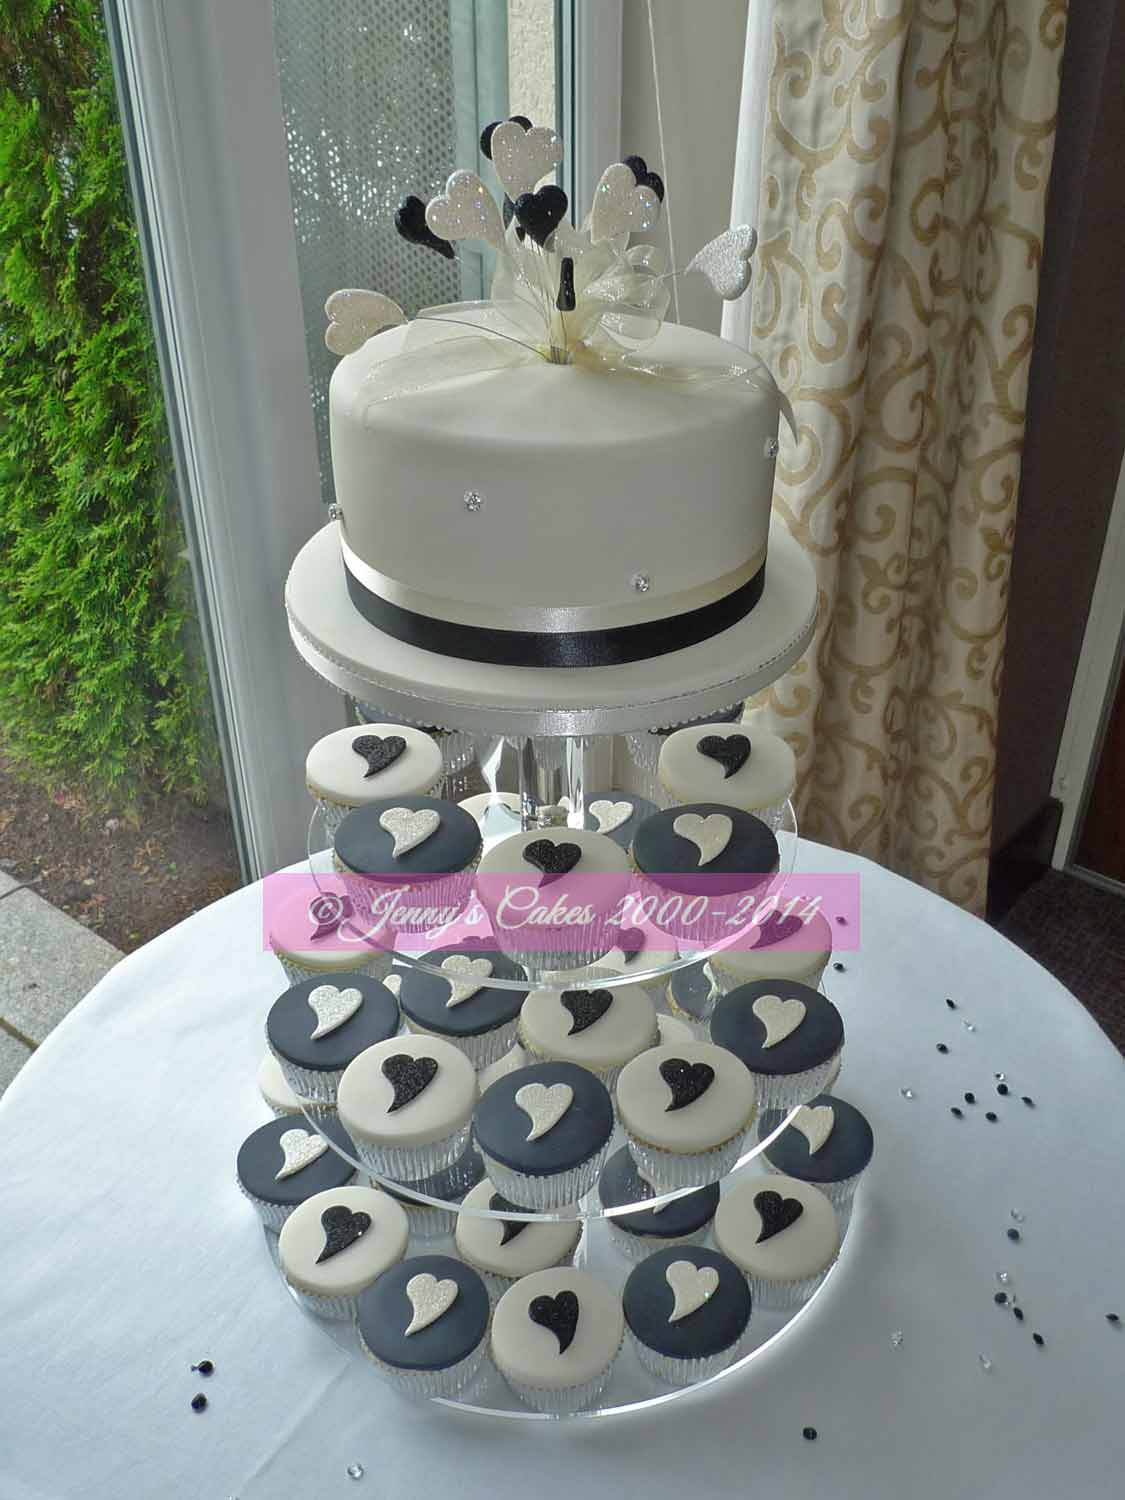 Wedding Cup Cakes Prices
 Cupcake wedding cake prices idea in 2017